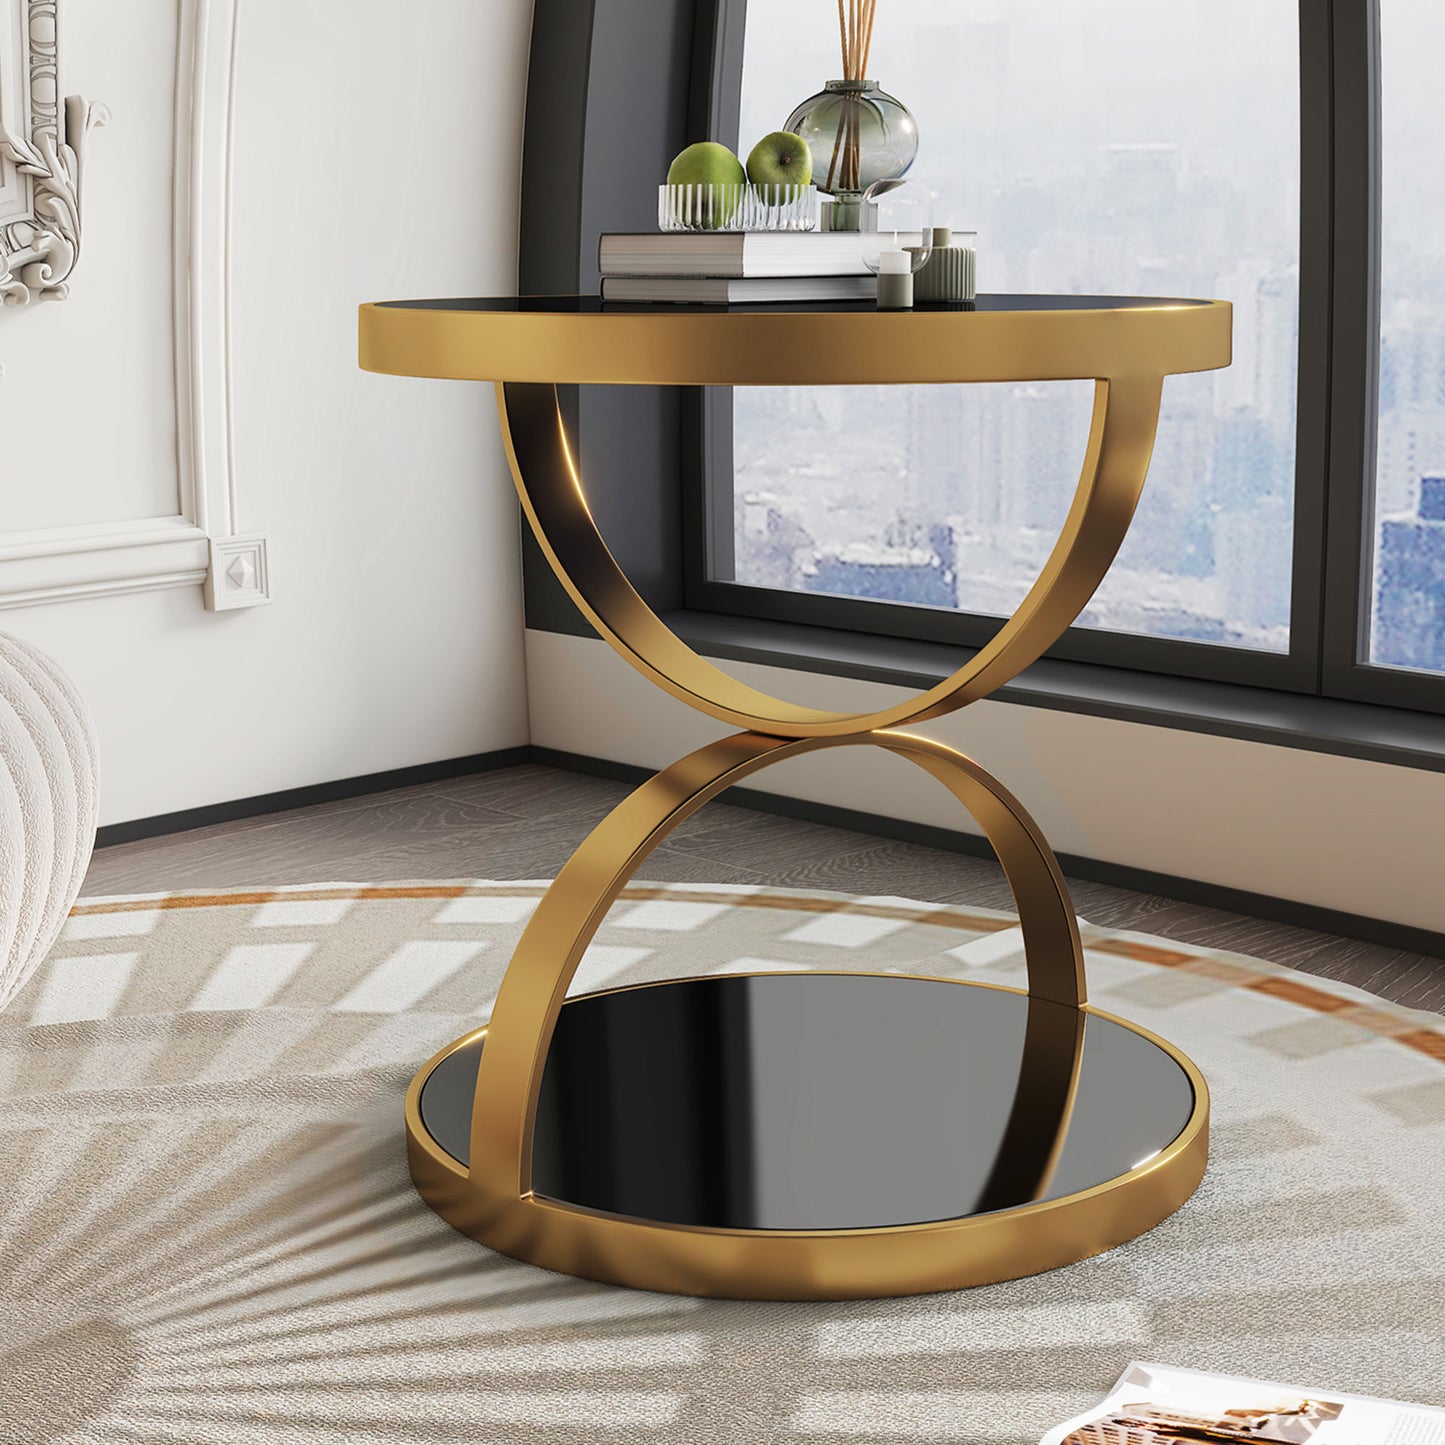 Luxury Stainless Steel End Table Decor with Storage Shelf for Home & Living Room |Gold Coffee Table|Outdoor & Indoor Furniture